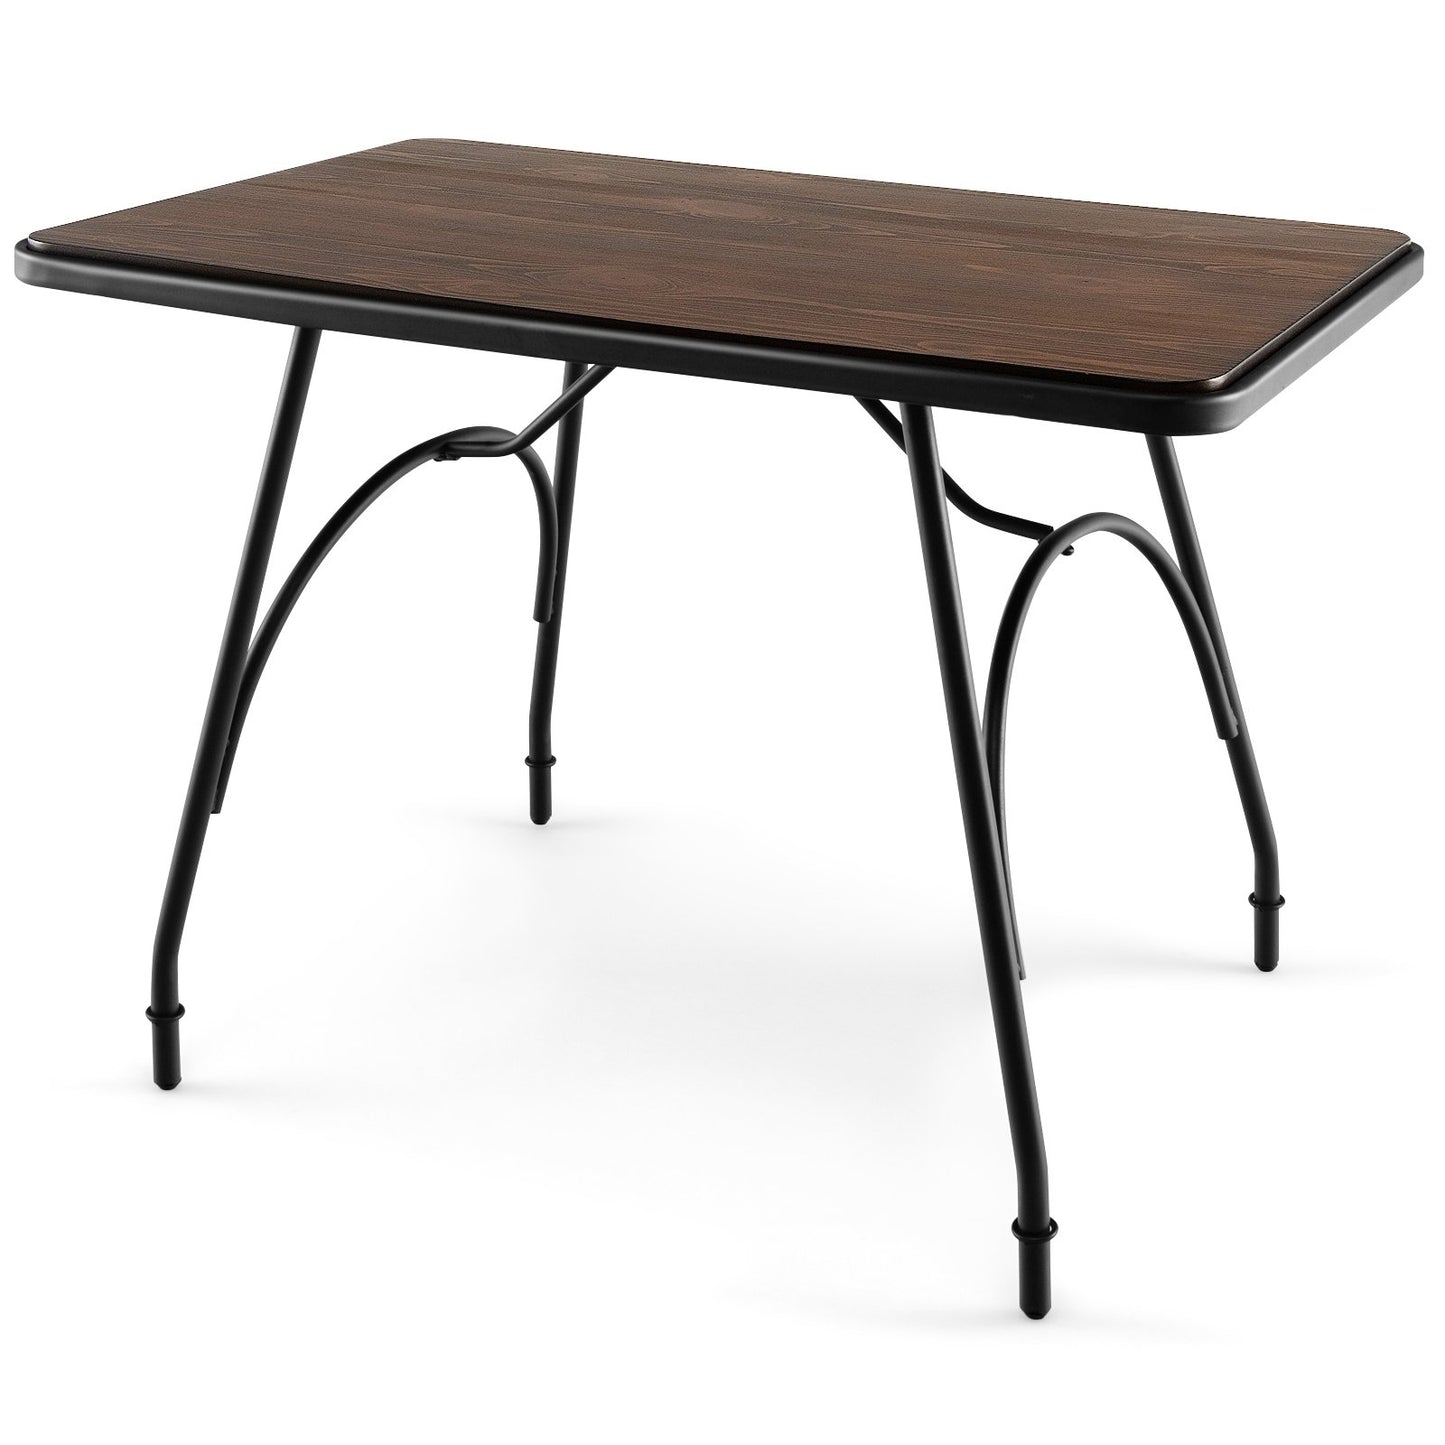 43 x 27.5 Inch Industrial Style Dining Table with Adjustable Feet, Rustic Brown